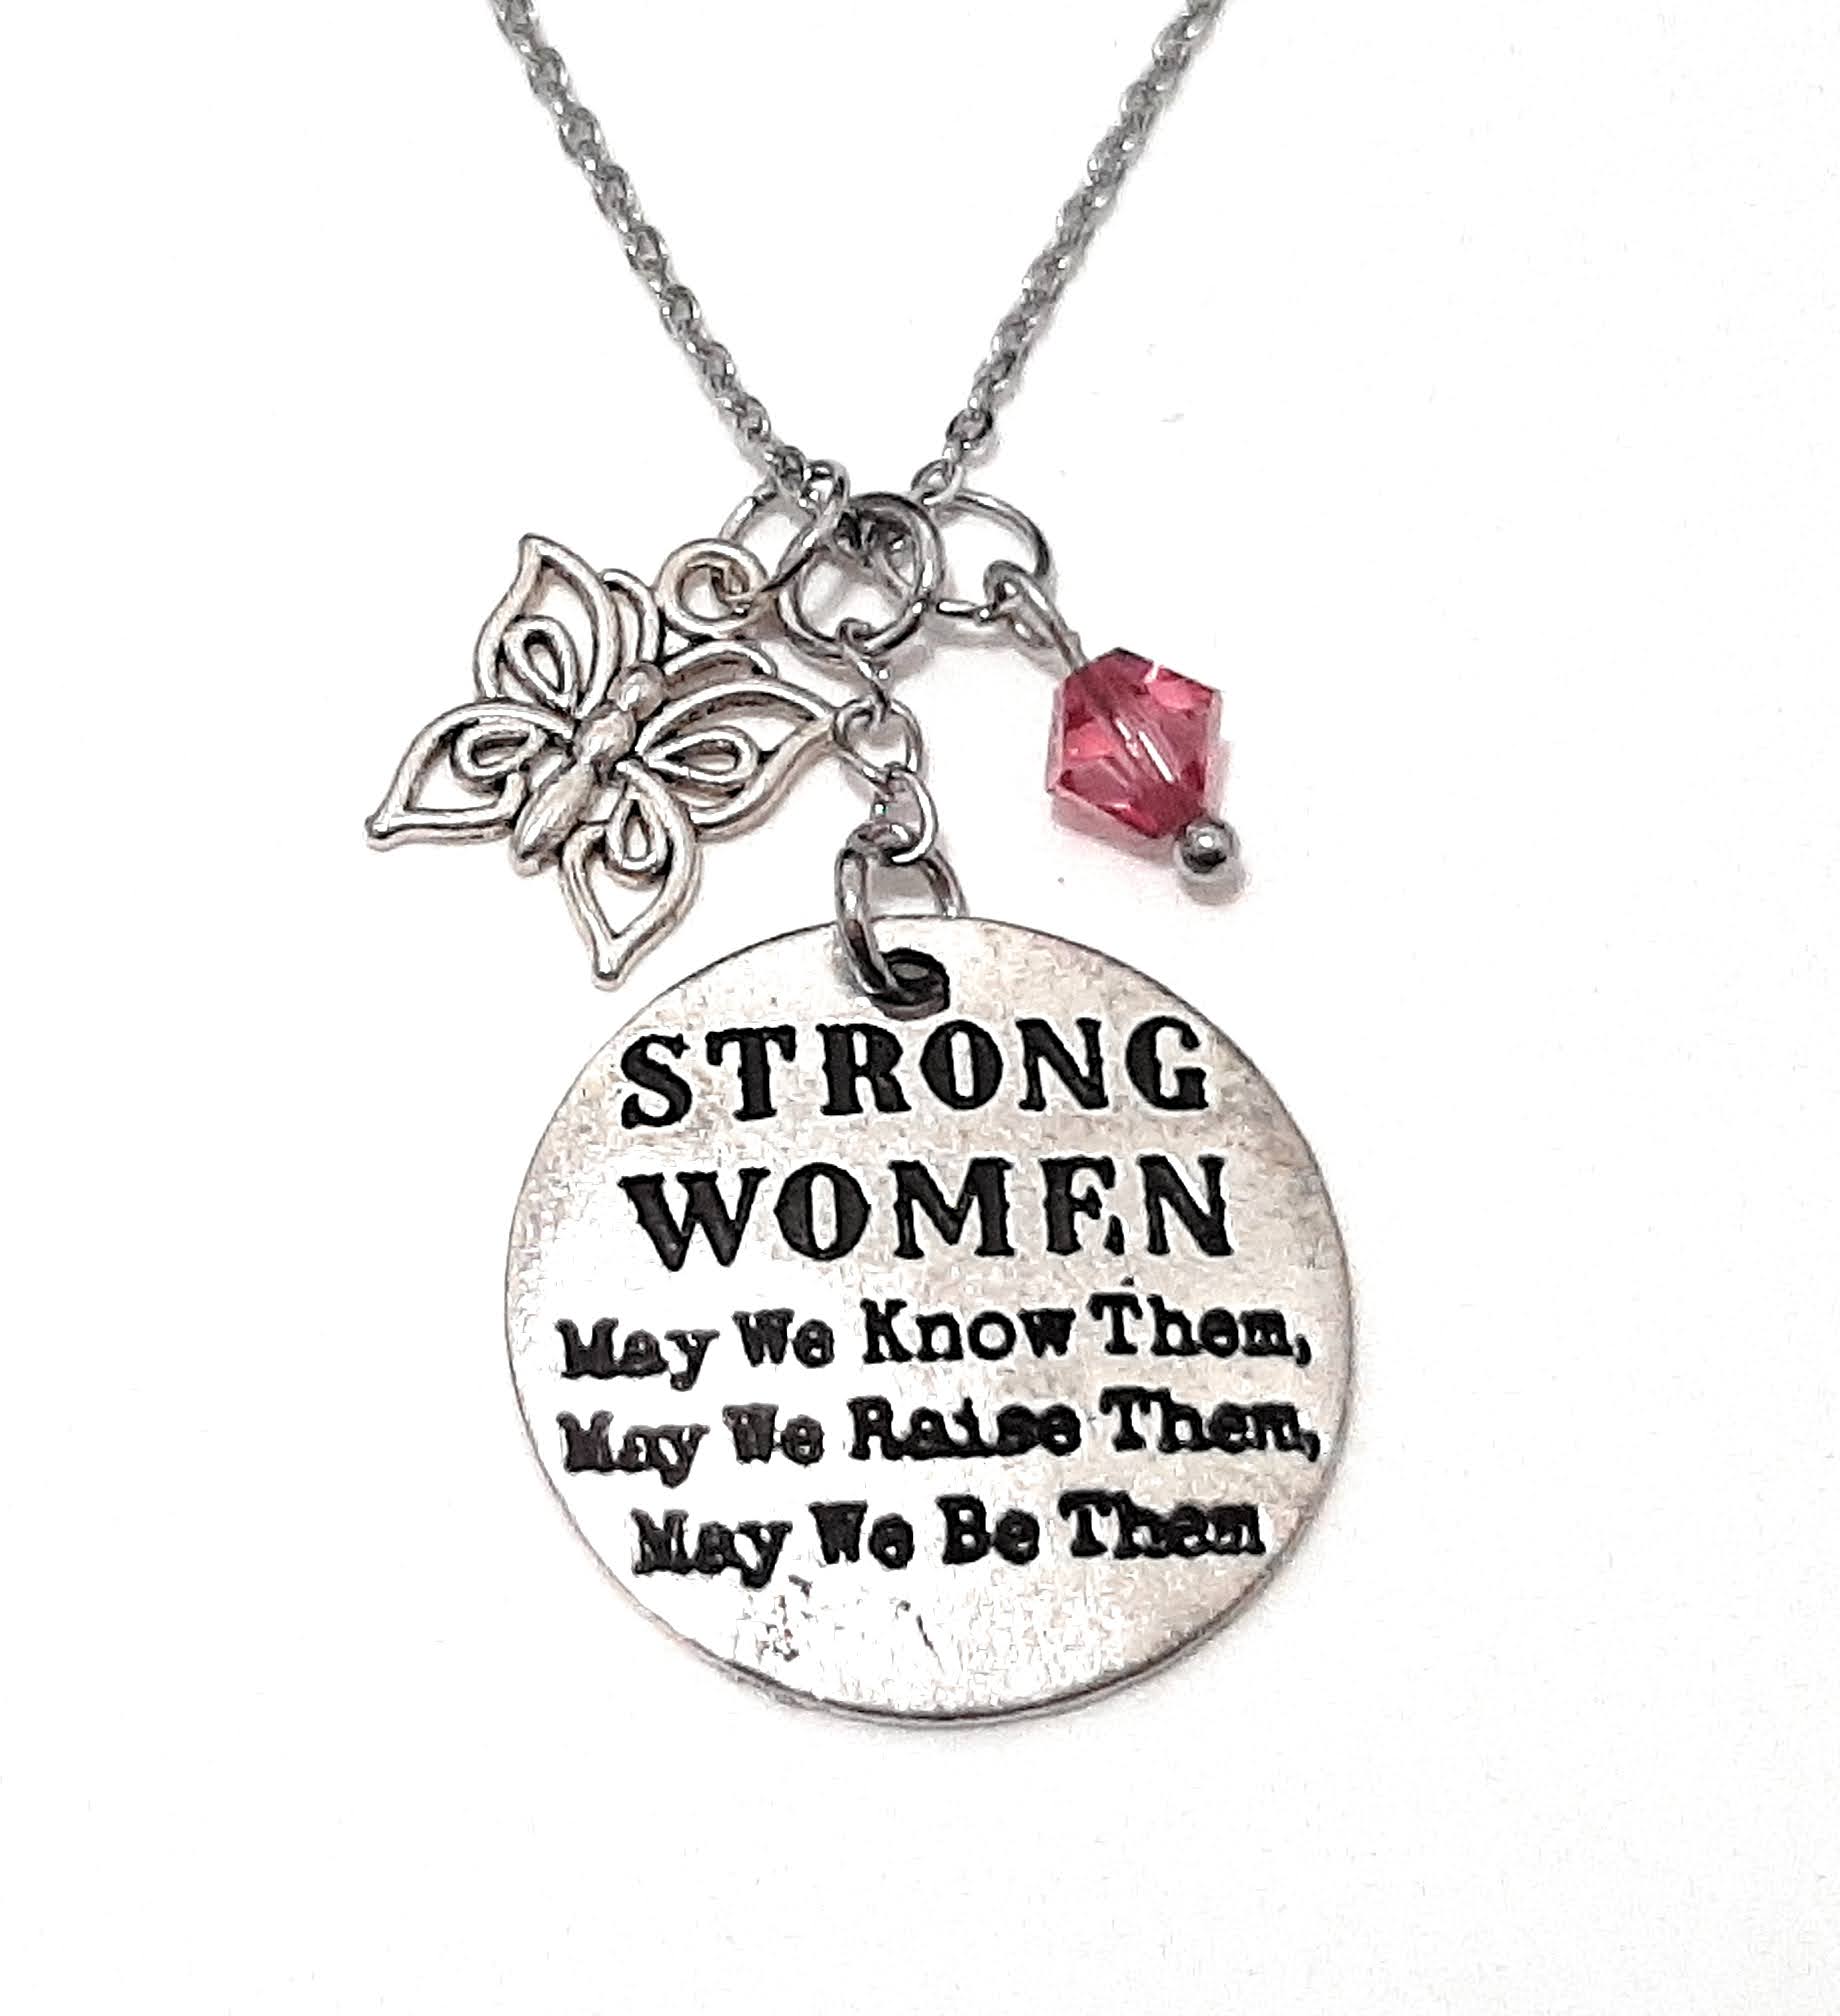 Message Pendant Necklace "Strong Women...May we be them" Your Choice of Charm and Birthstone Color